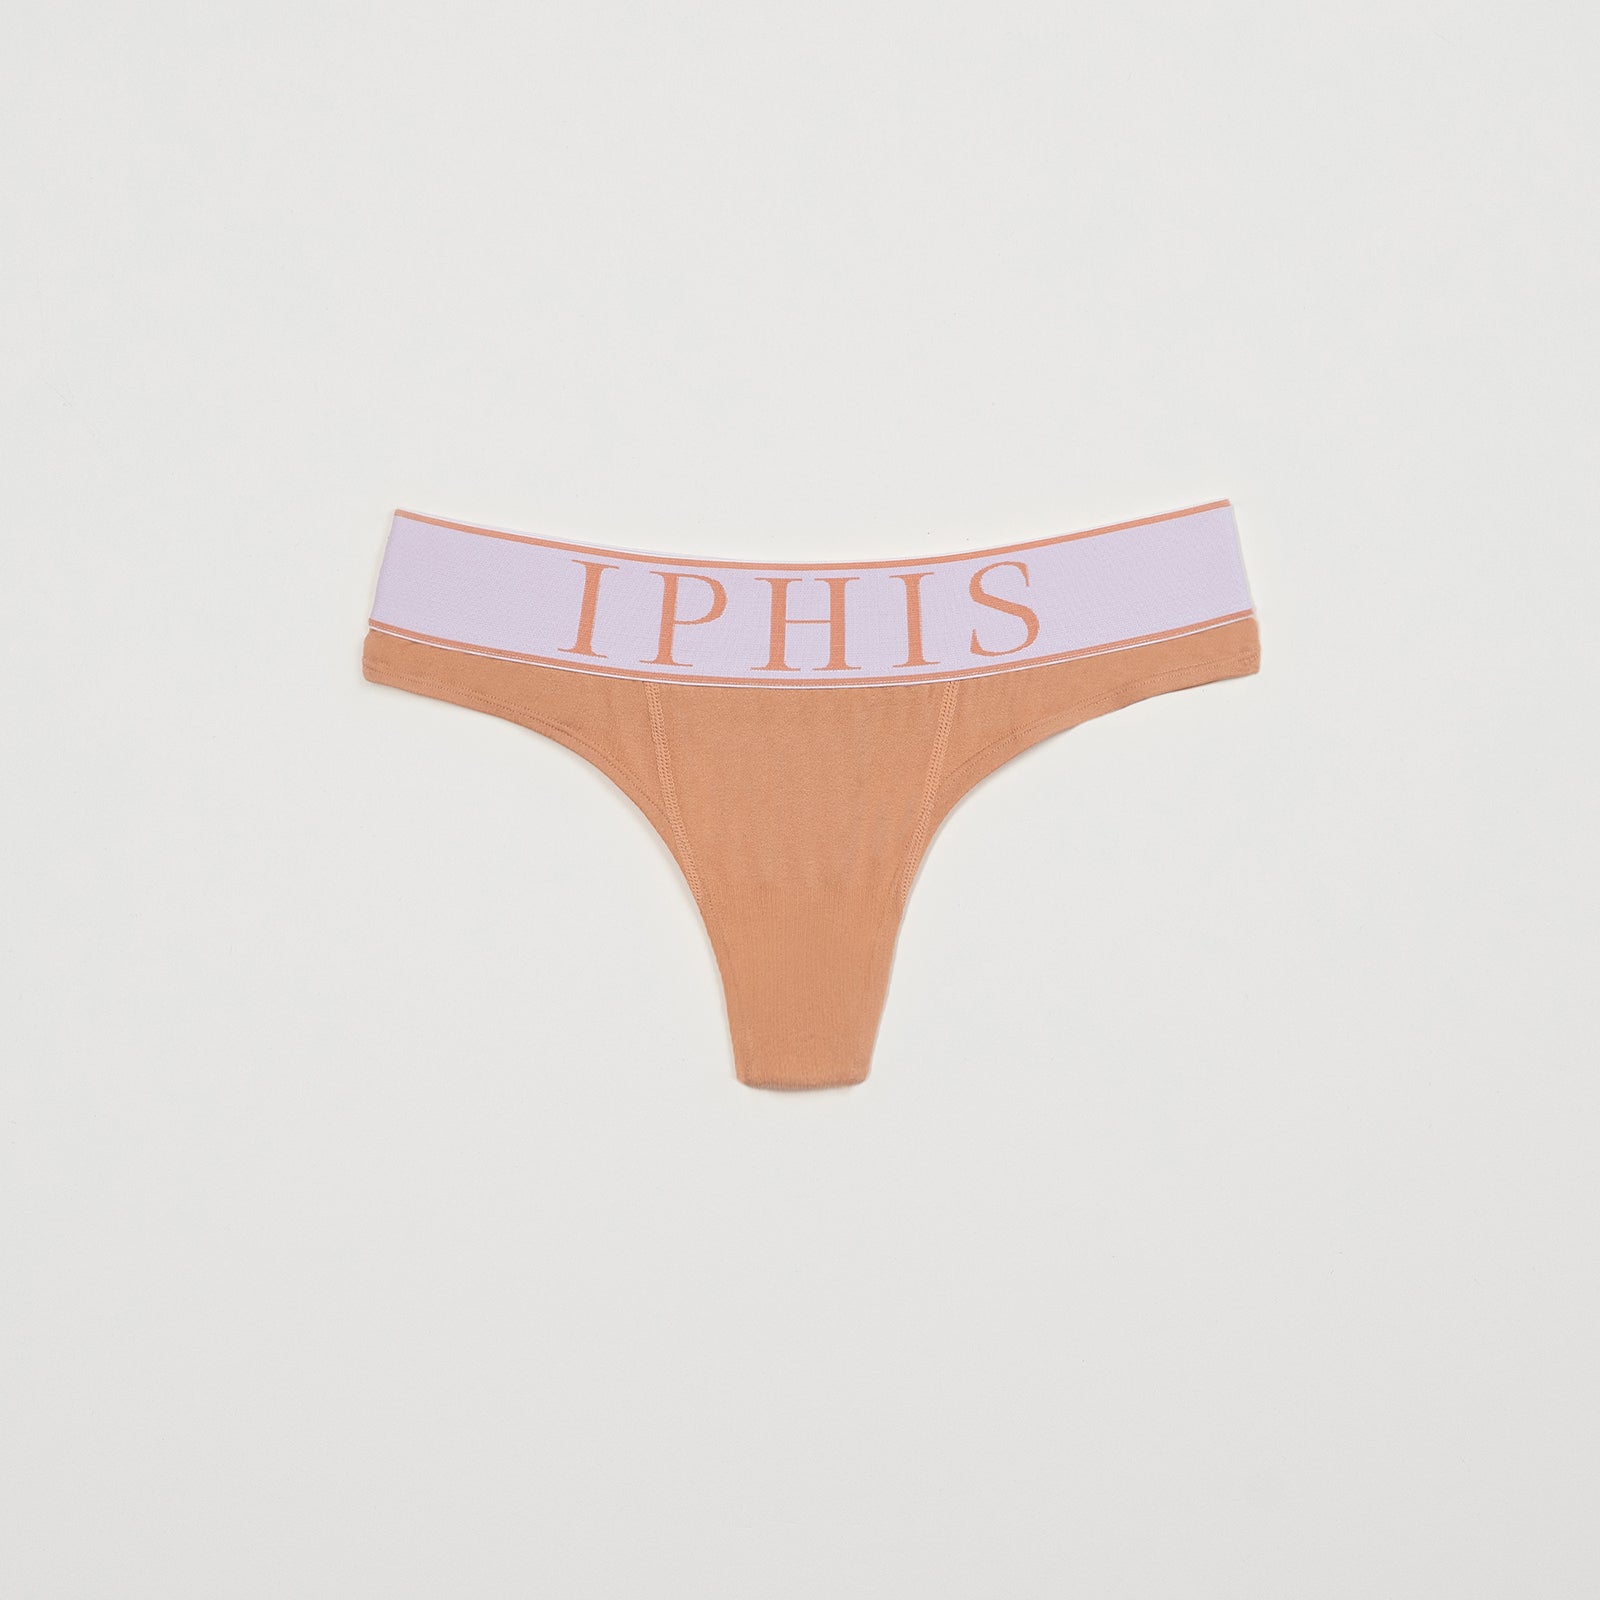 SS23 - Icon Seamless Thong – IPHIS